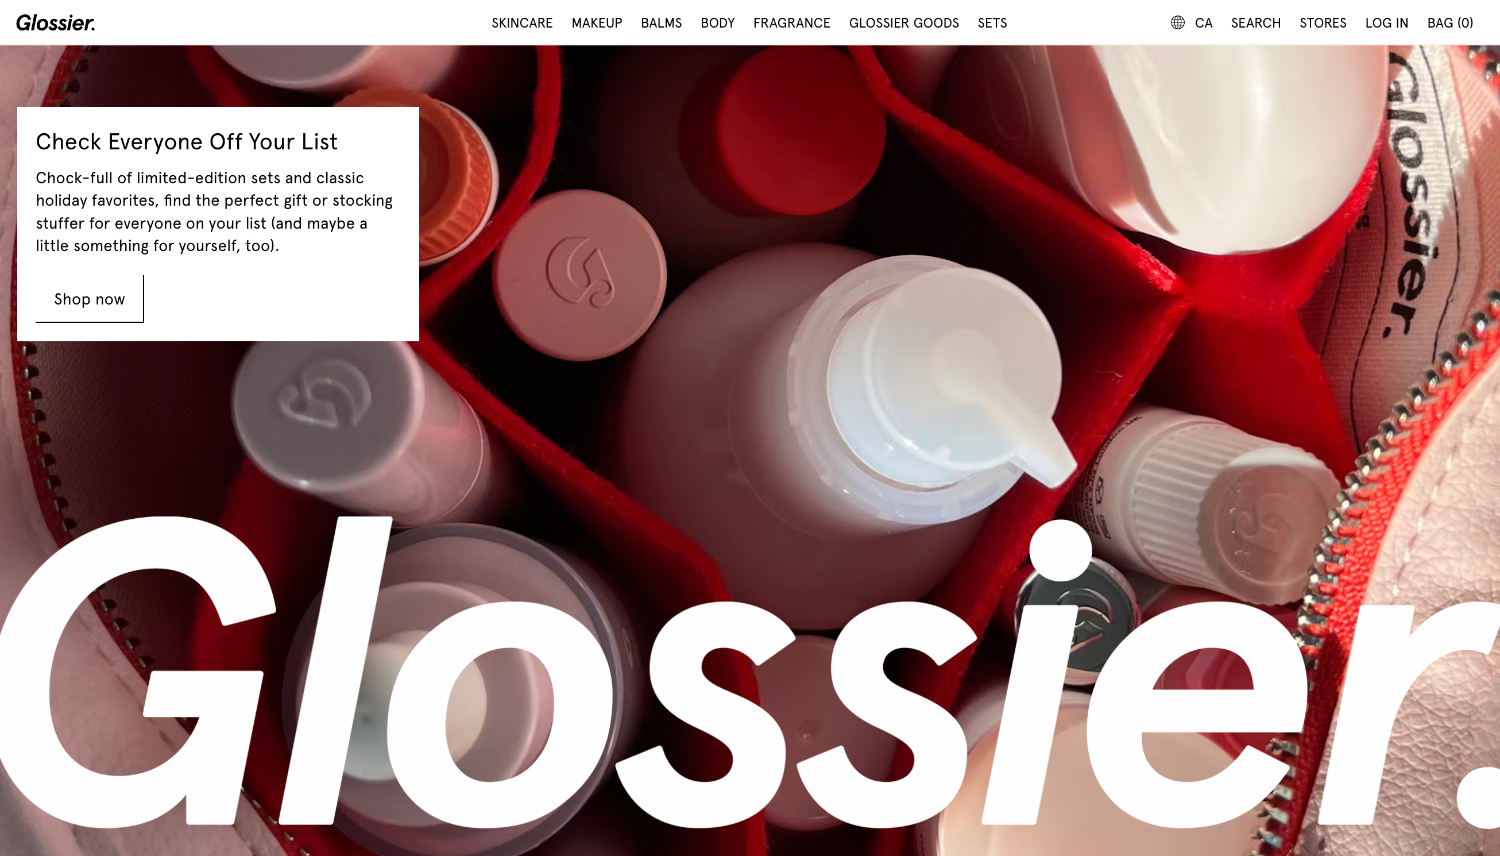 Ecommerce website page for brand Glossier